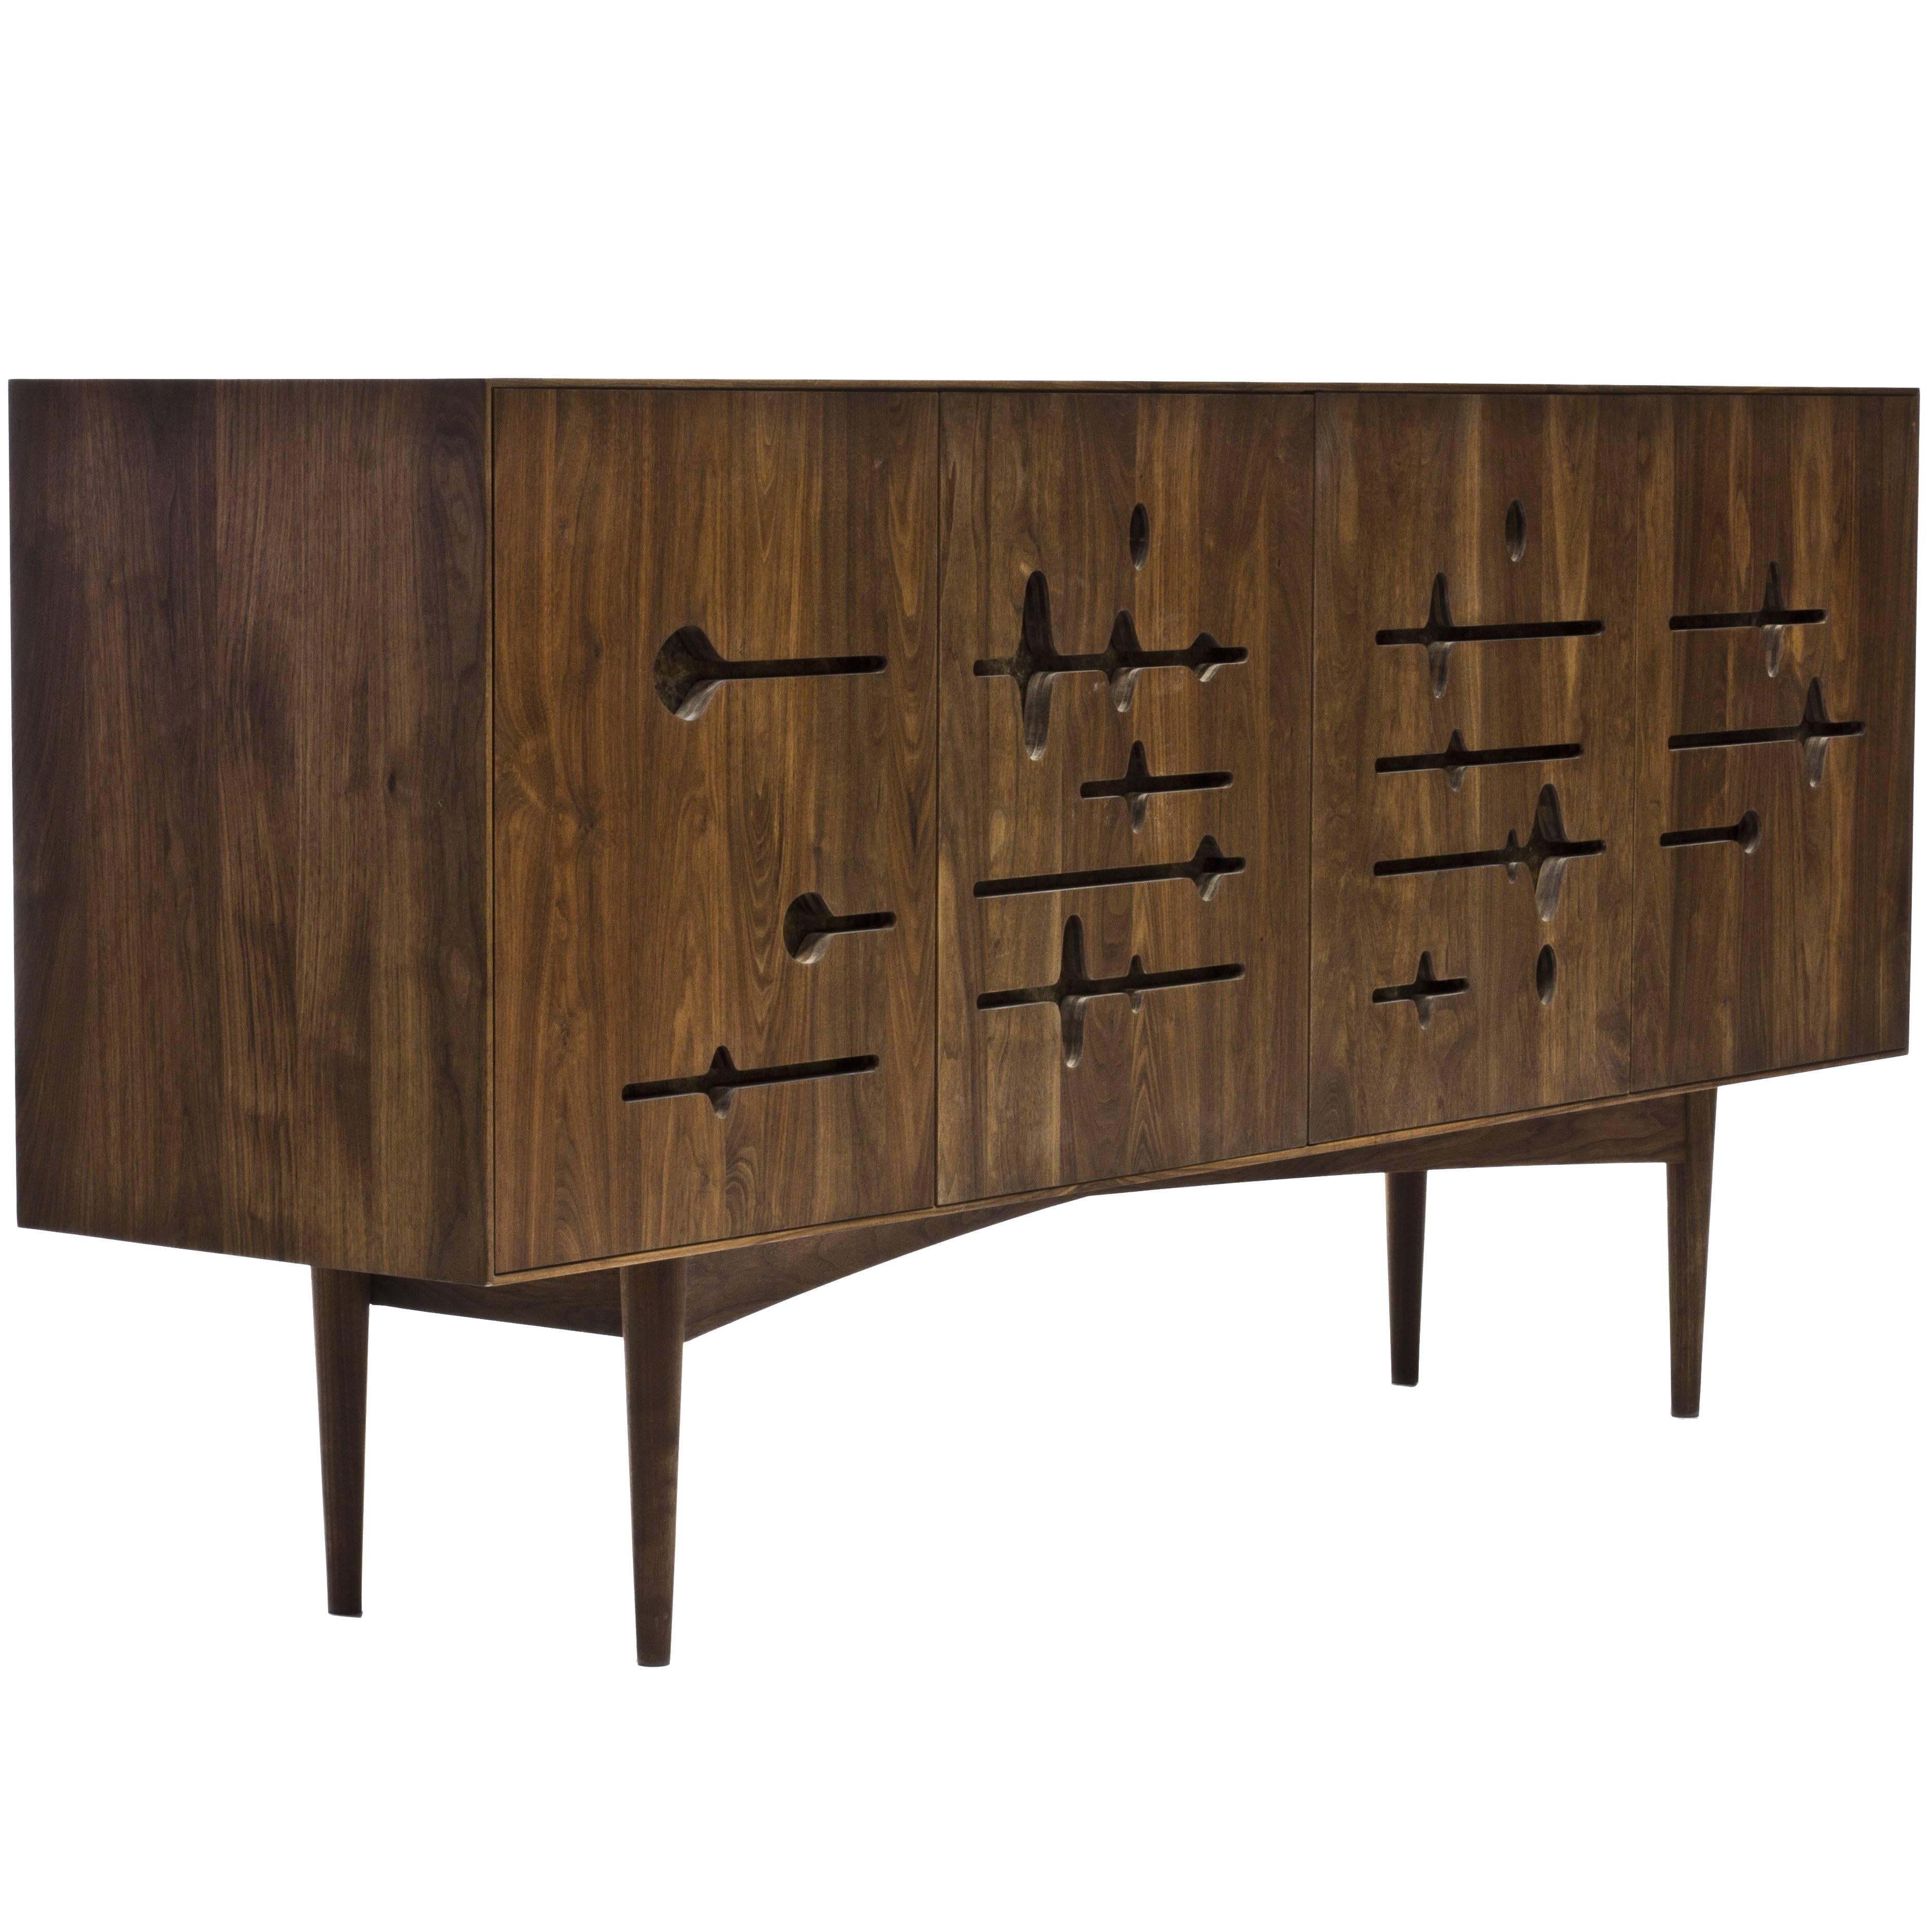 Sine Wave Console in Oiled Walnut and Mica by Michael Dreeben for Wooda